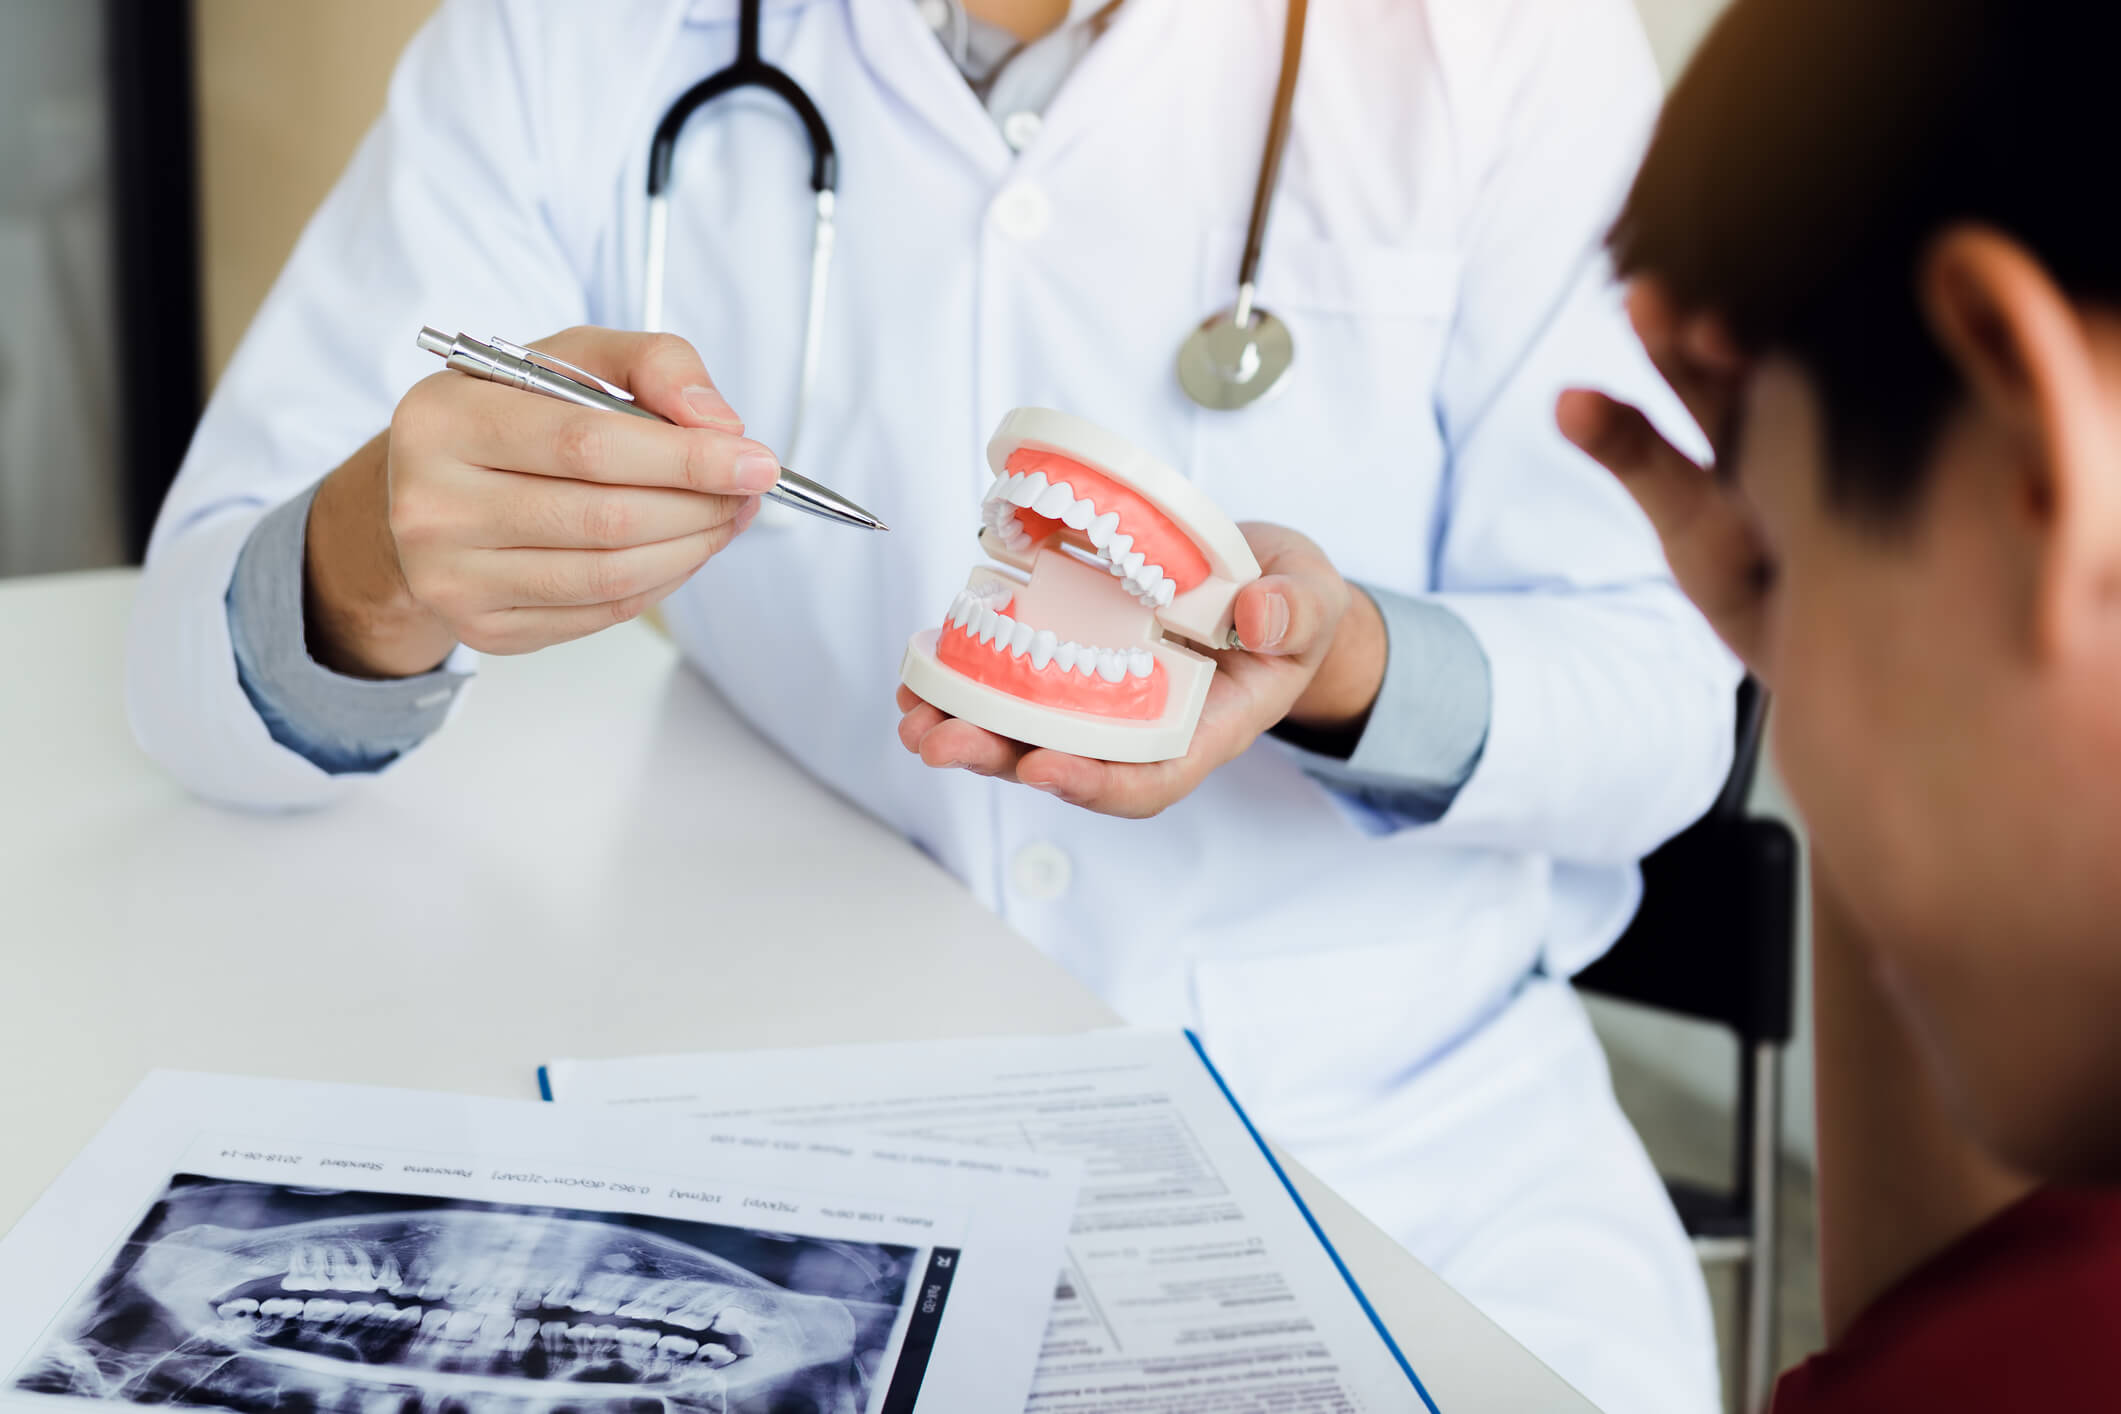 dentist holding a denture during consultation